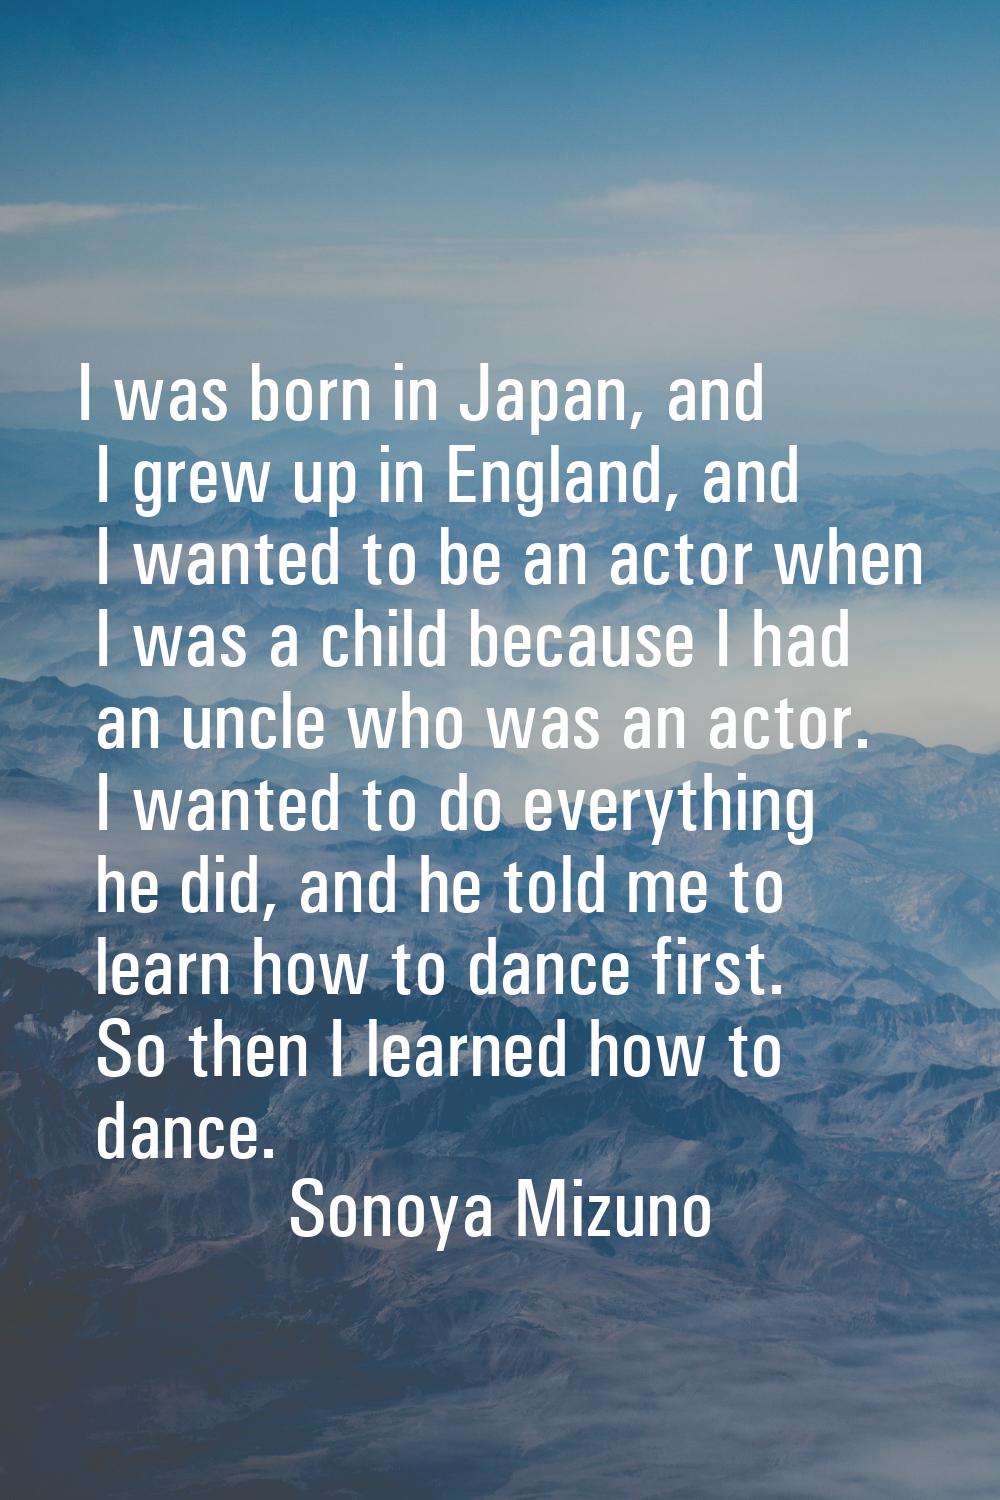 I was born in Japan, and I grew up in England, and I wanted to be an actor when I was a child becau